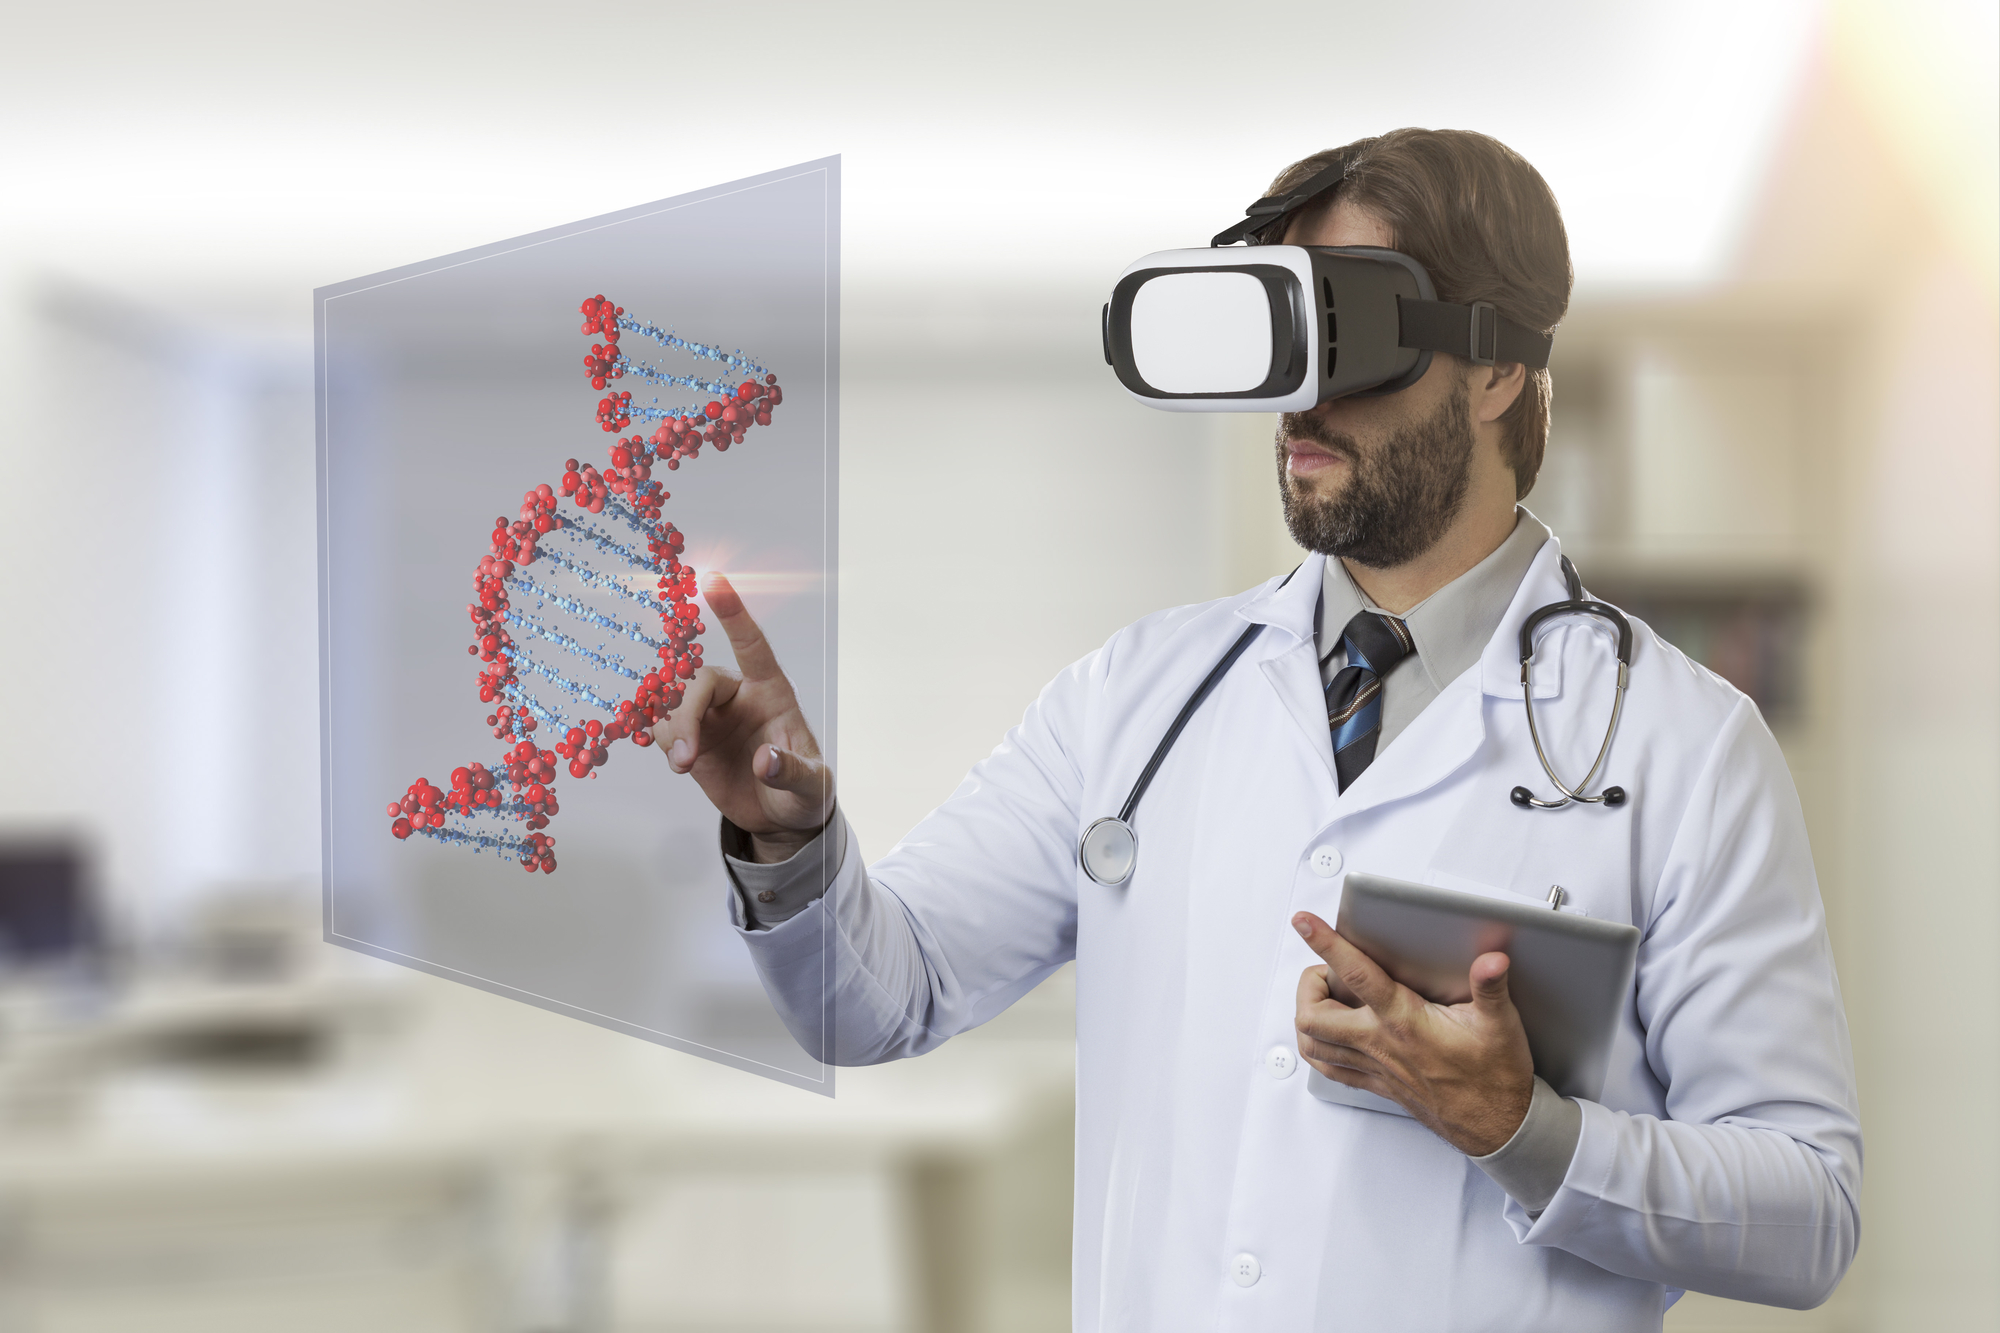 A doctor in a lab coat and vr headset interacts with a 3d hologram of a dna molecule while holding a tablet, utilizing it services for healthcare, in a clinical setting.